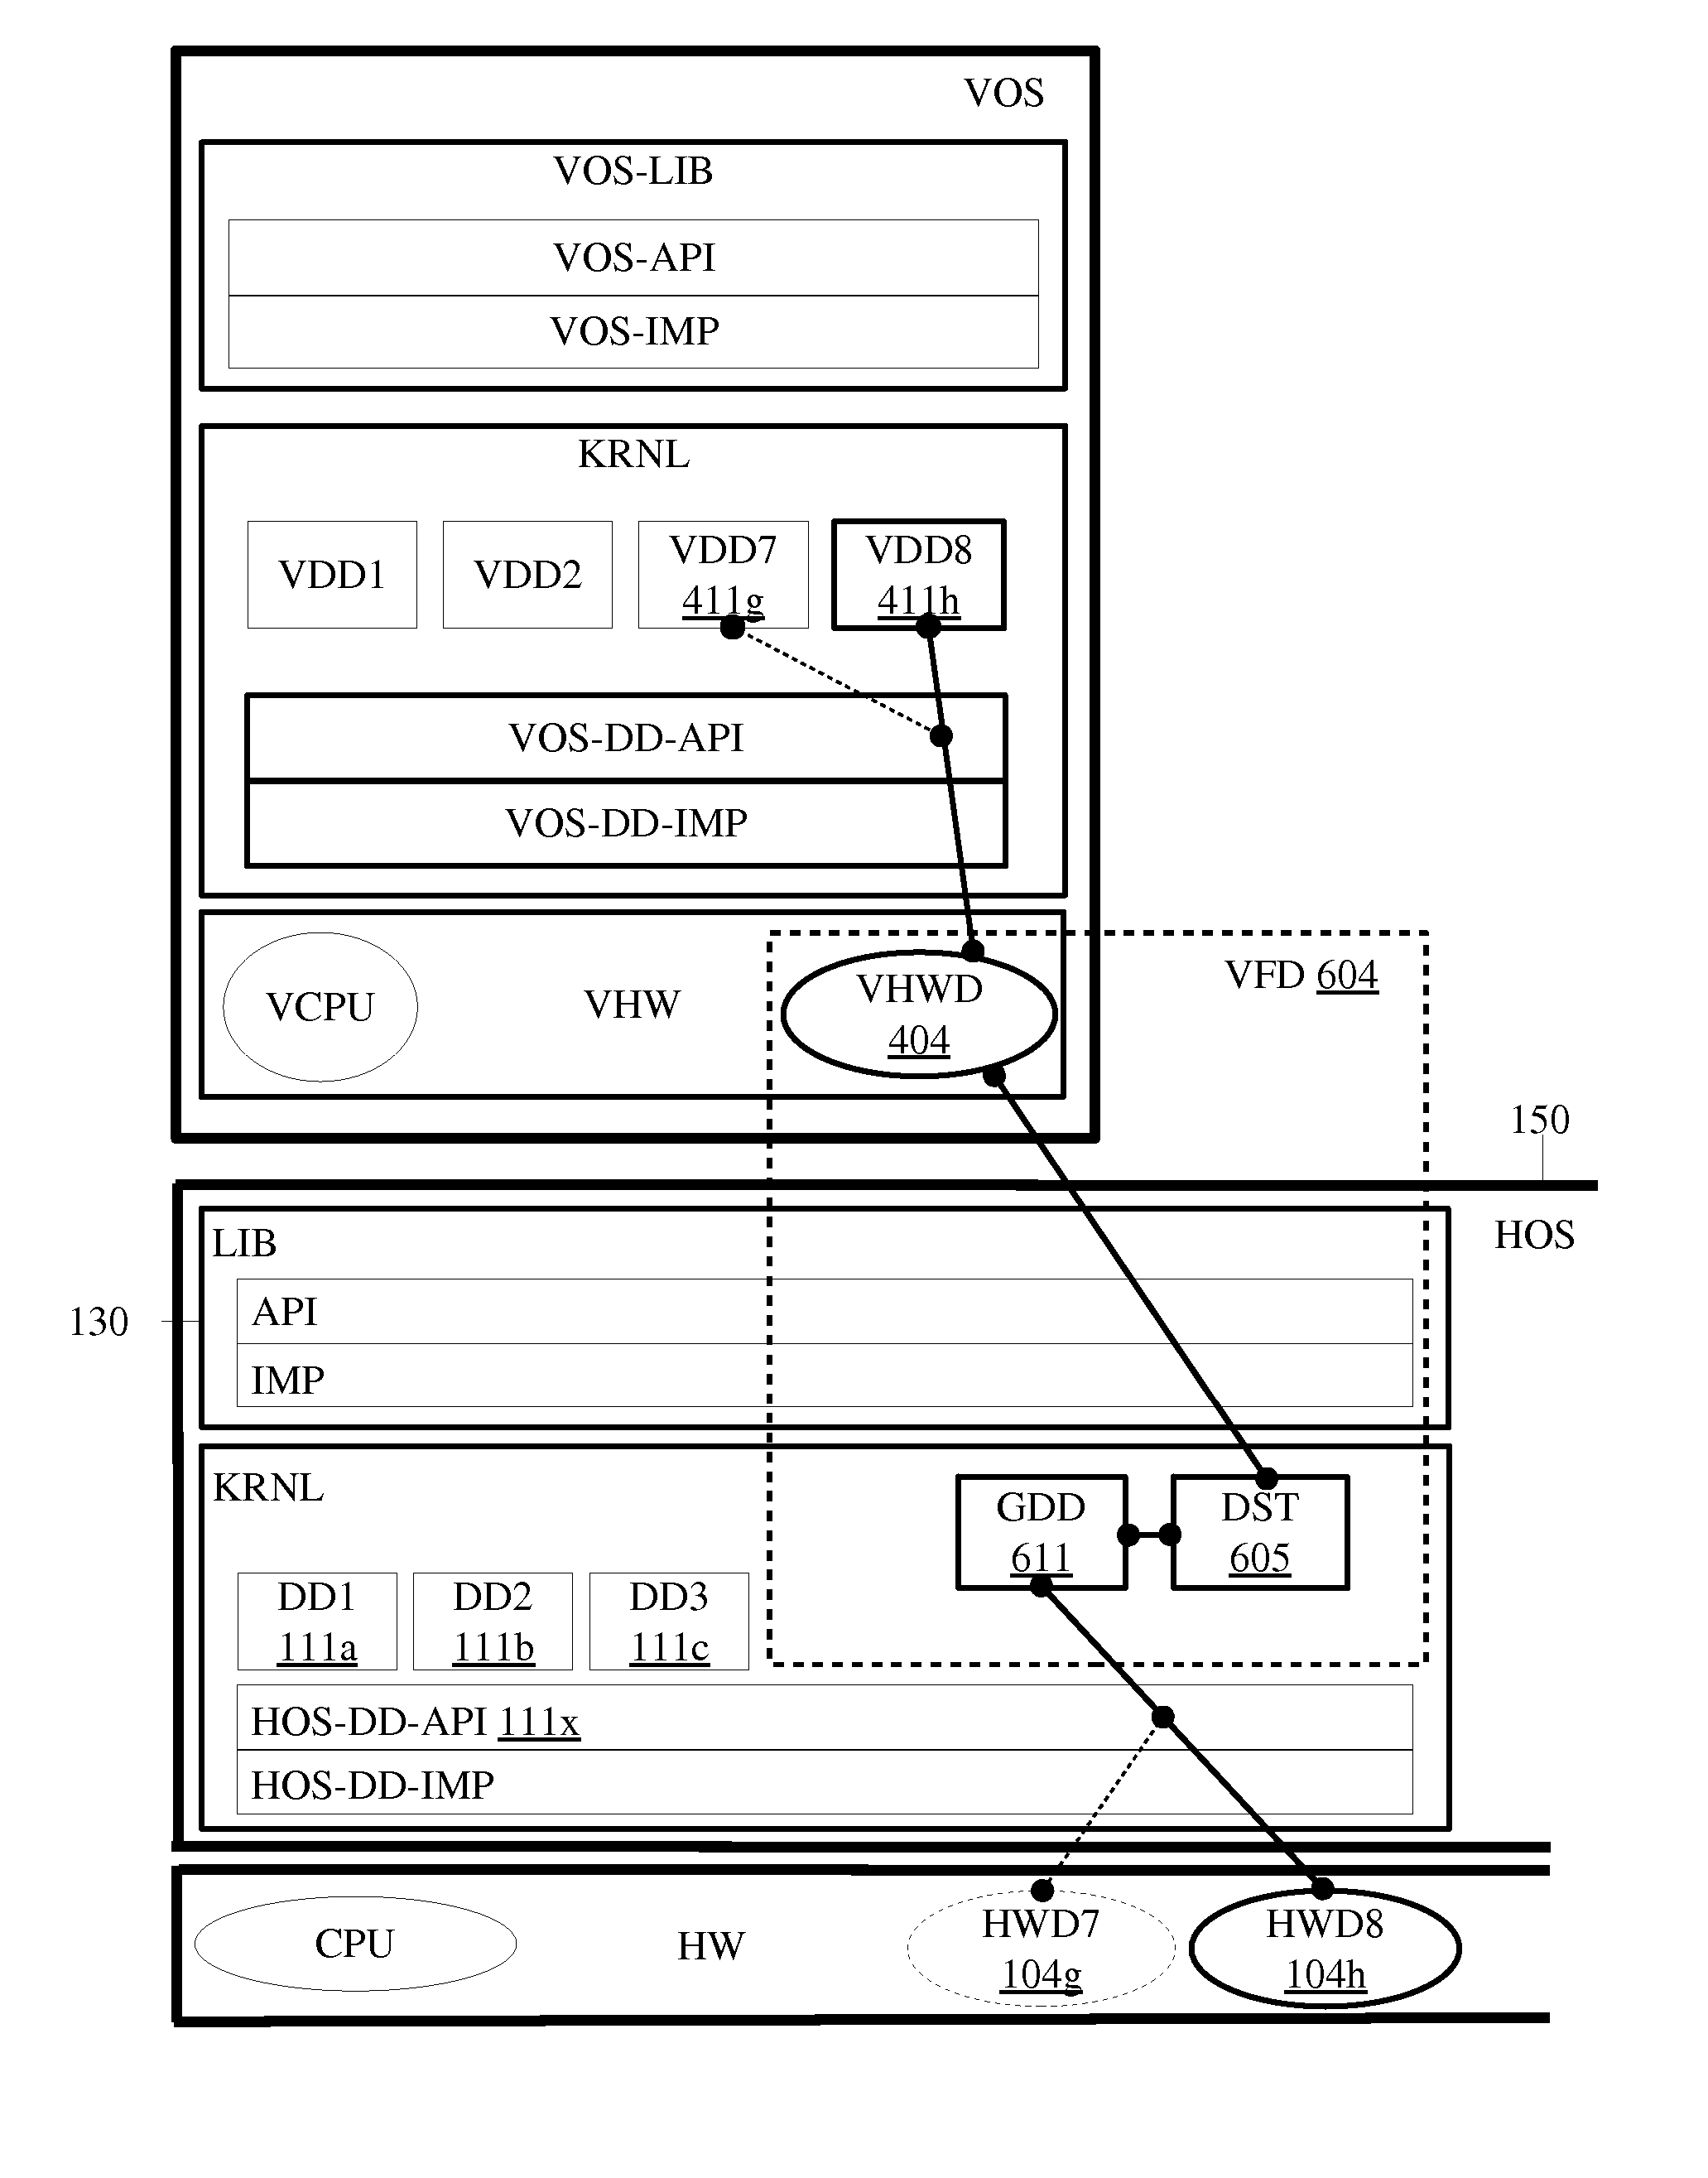 Software executables having virtual hardware, operating systems, and networks